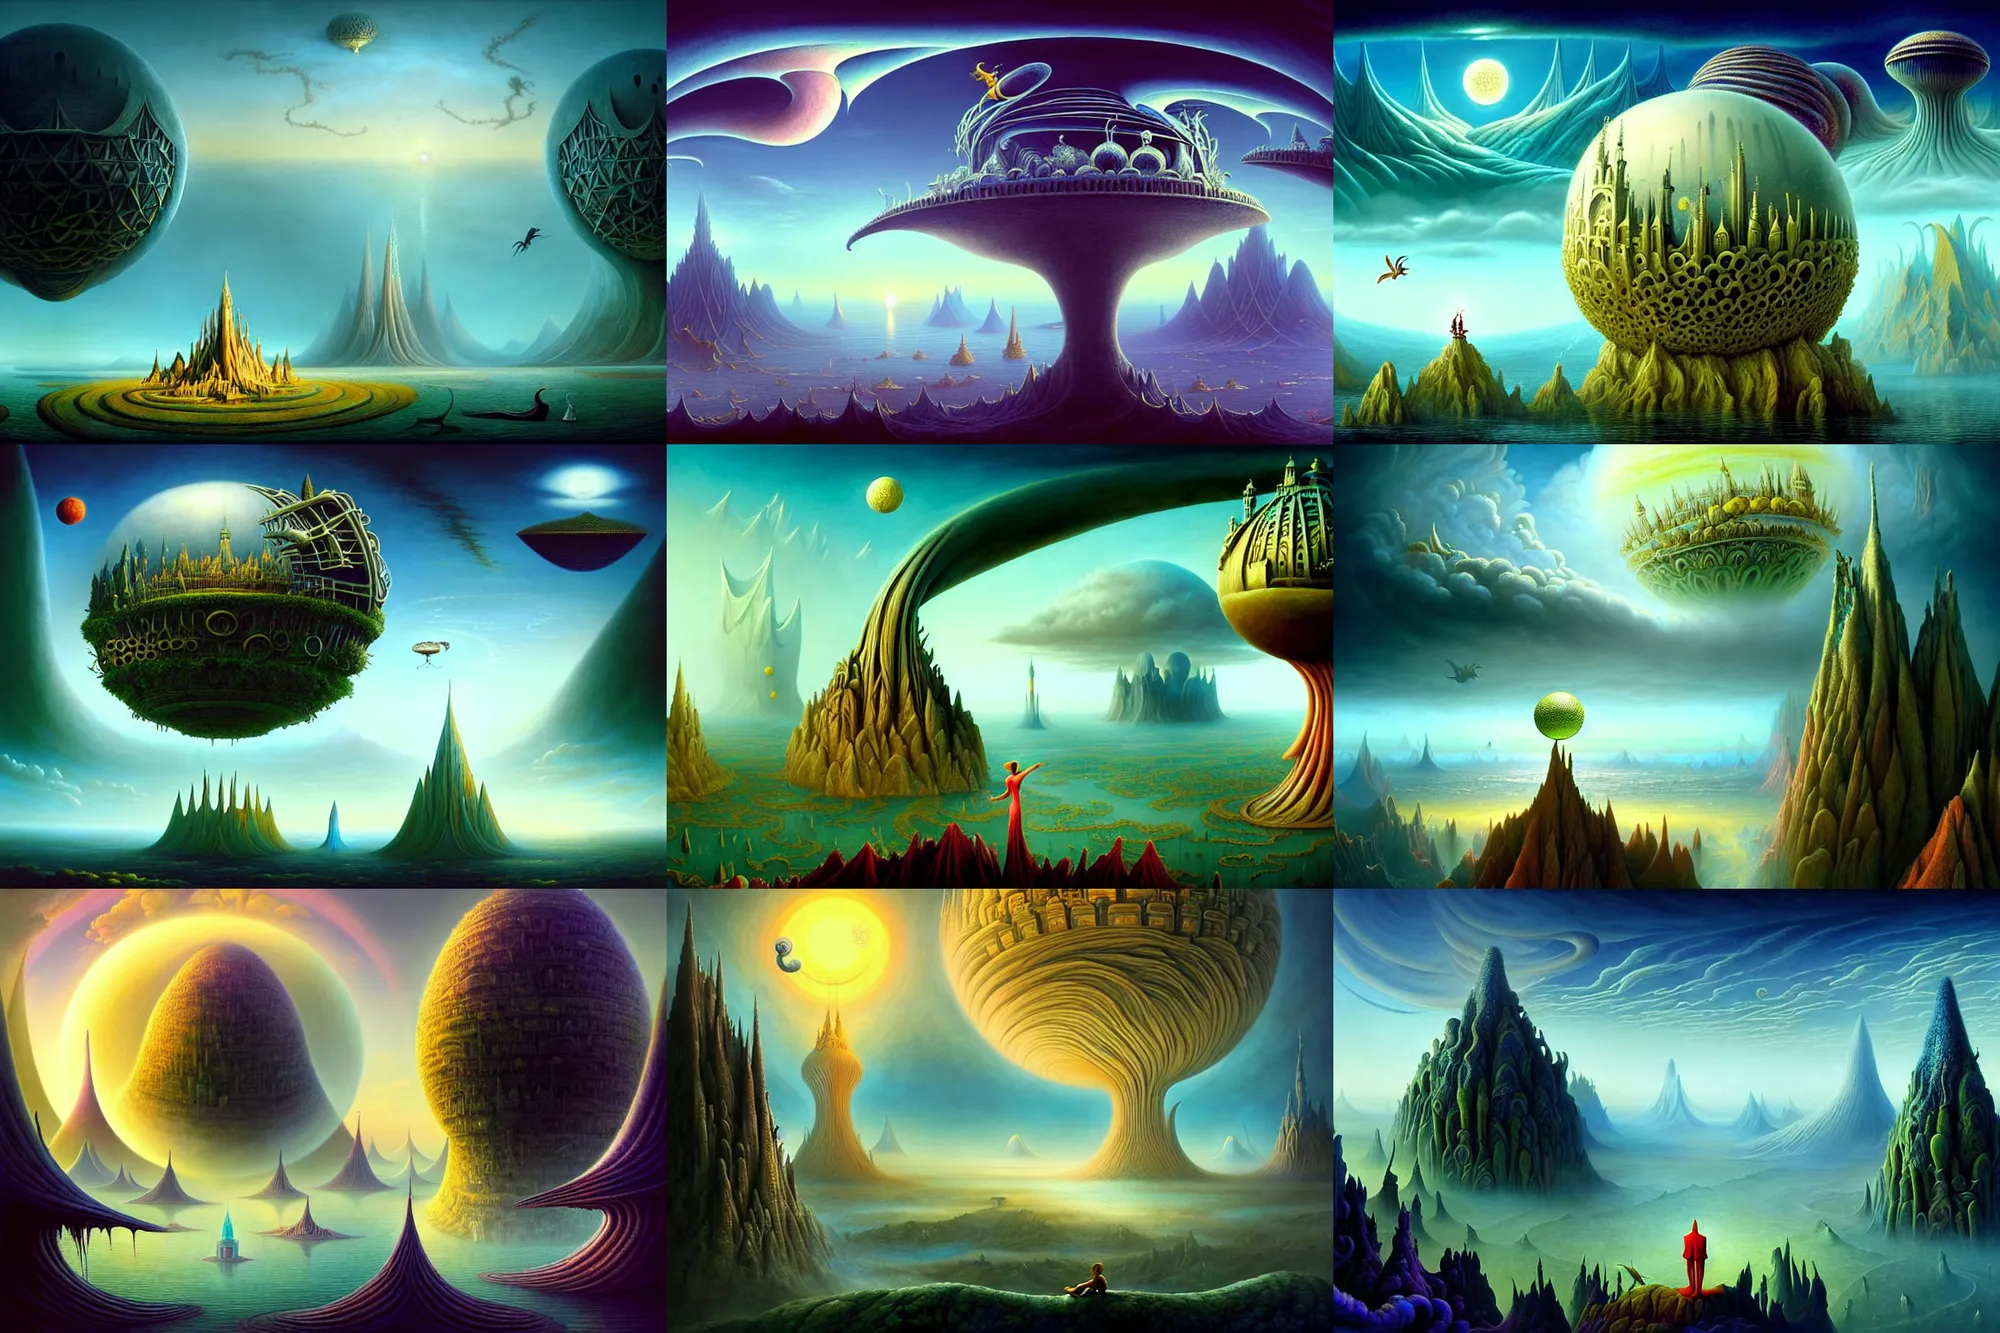 Prompt: a beautiful epic stunning amazing and insanely detailed matte painting of alien dream worlds with surreal architecture designed by Heironymous Bosch, Baron von Munchausen surveys the horizon, mega structures inspired by Heironymous Bosch's Garden of Earthly Delights, vast surreal landscape and horizon by Cyril Rolando and Andrew Ferez, fantastical creatures, rich pastel color palette, masterpiece!!, grand!, imaginative!!!, whimsical!!, epic scale, intricate details, sense of awe, elite, wonder, insanely complex, masterful composition, cinematic, sharp focus